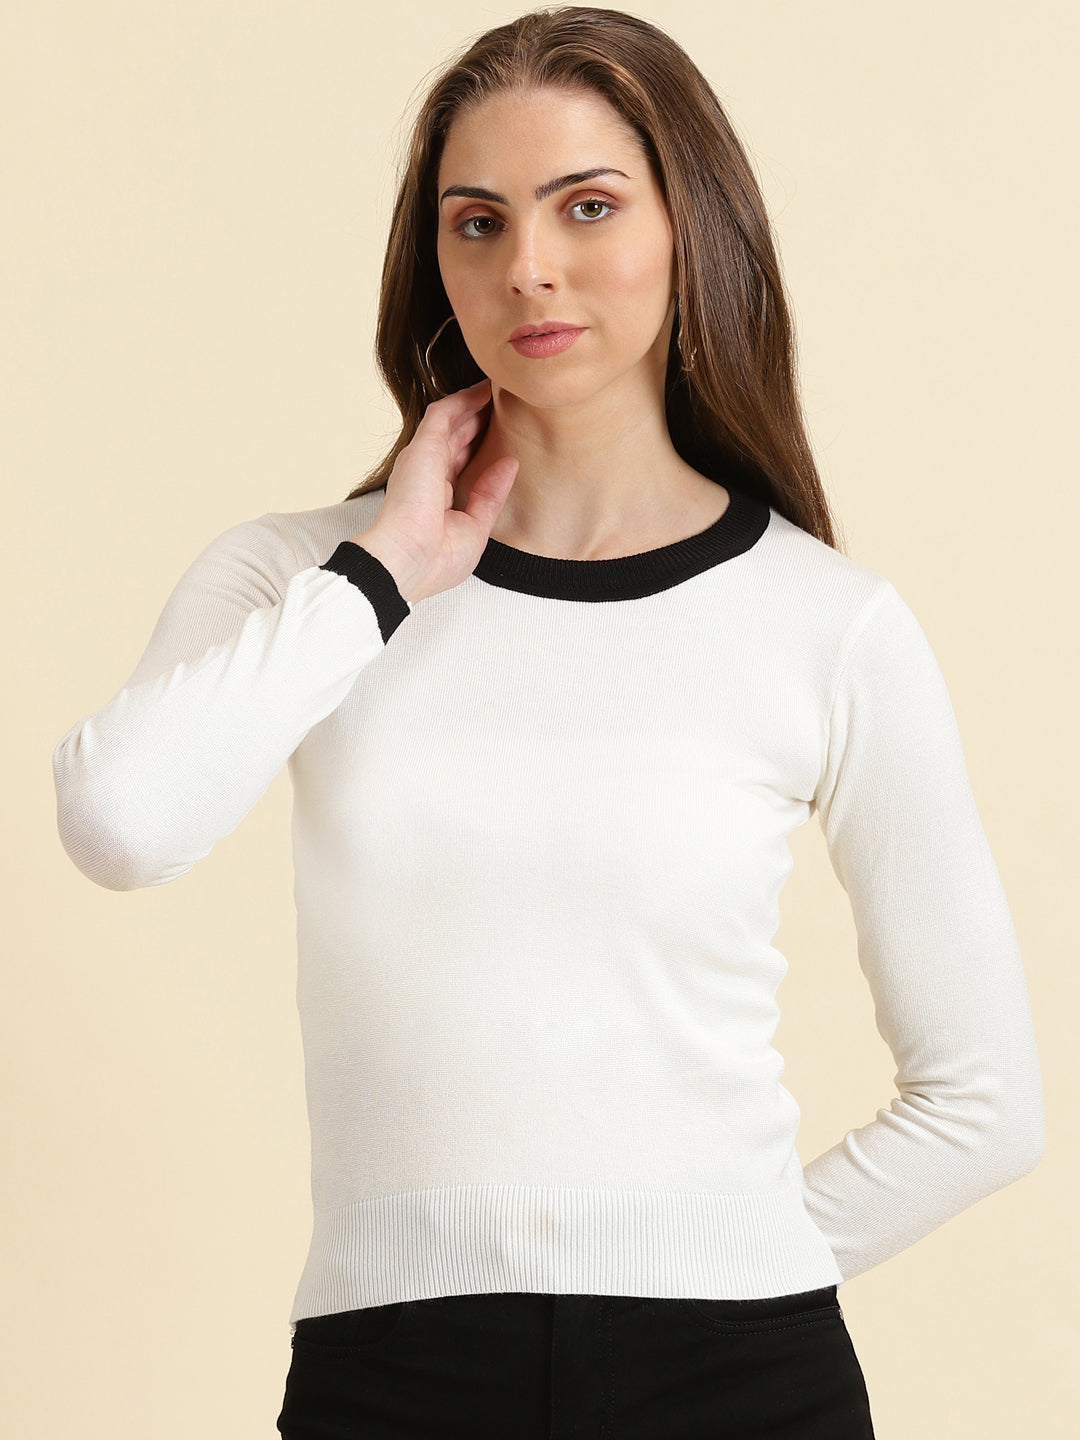 Women's White Solid Fitted Top